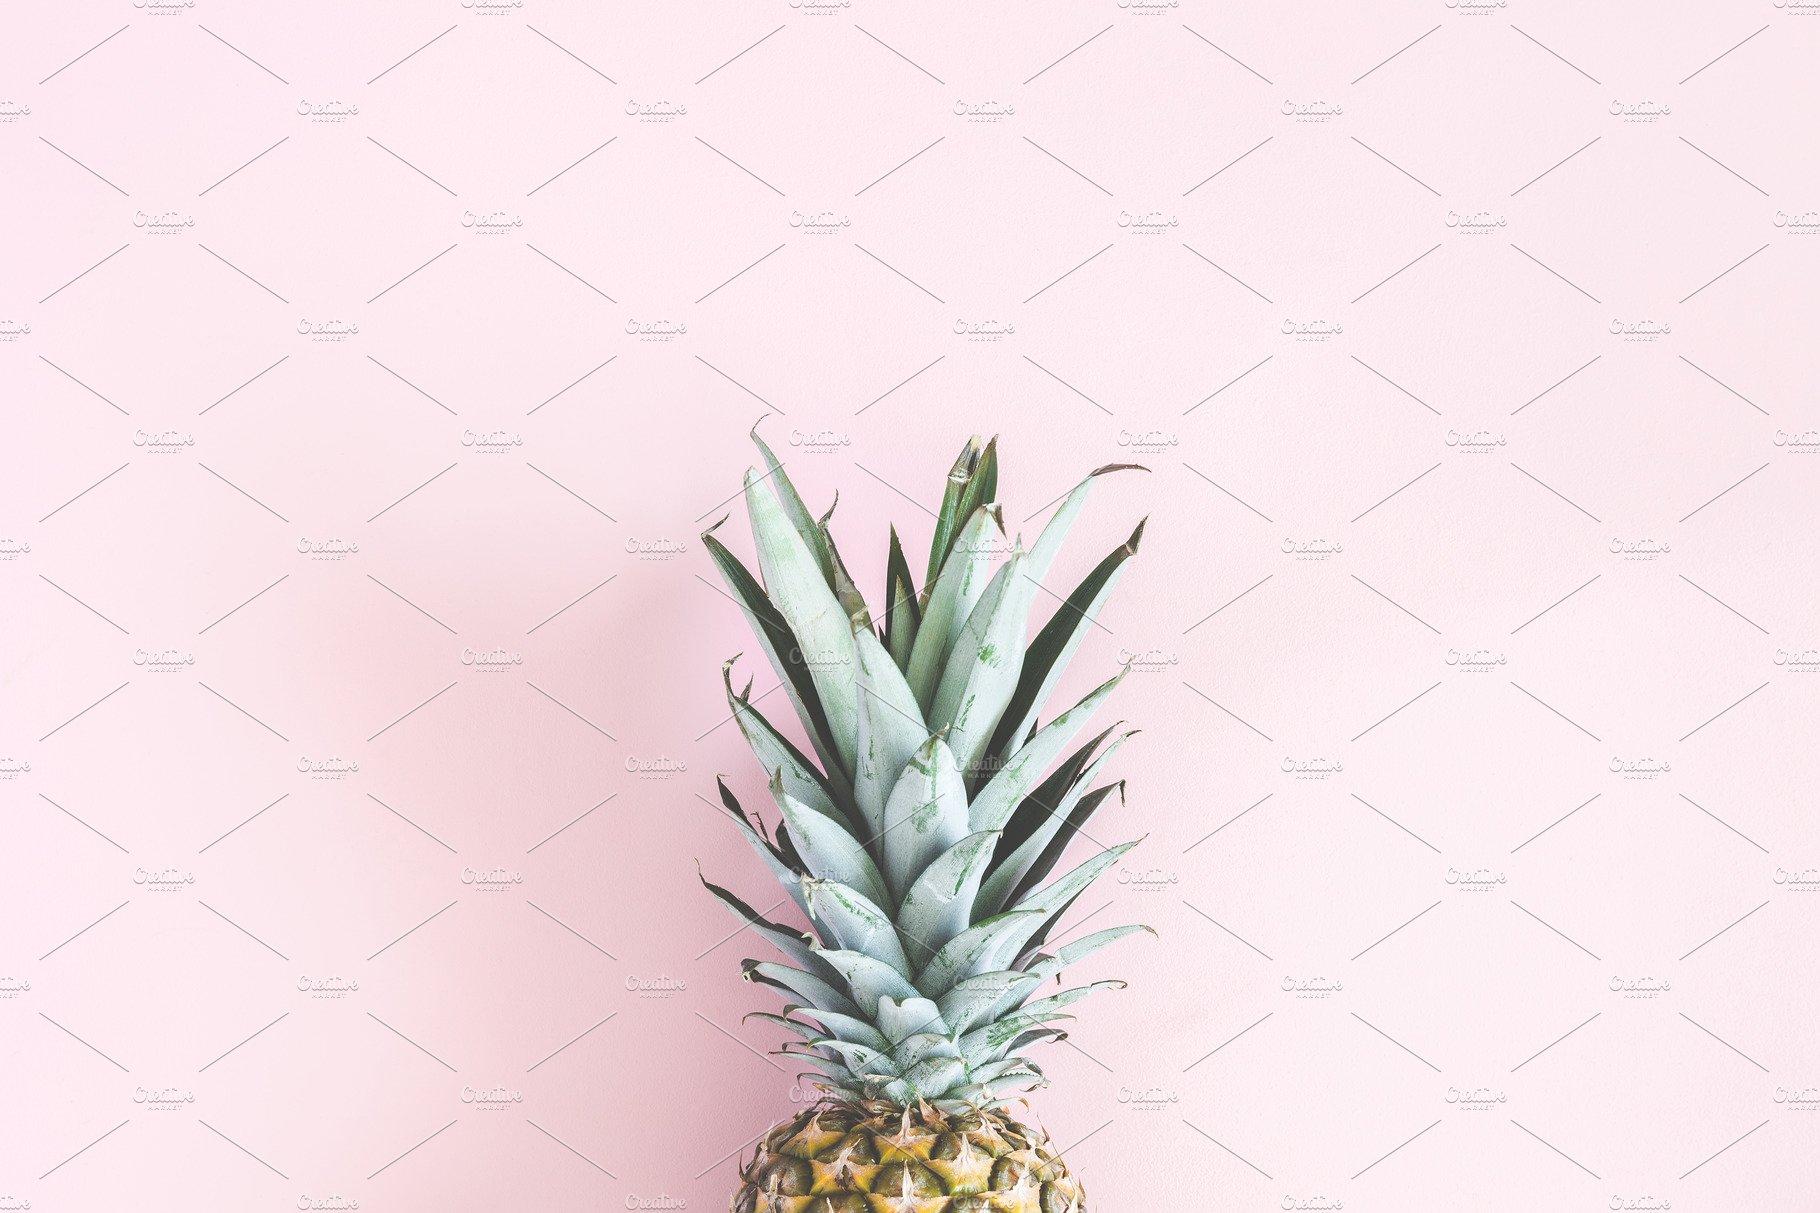 Pink Pineapple Pictures  Download Free Images on Unsplash